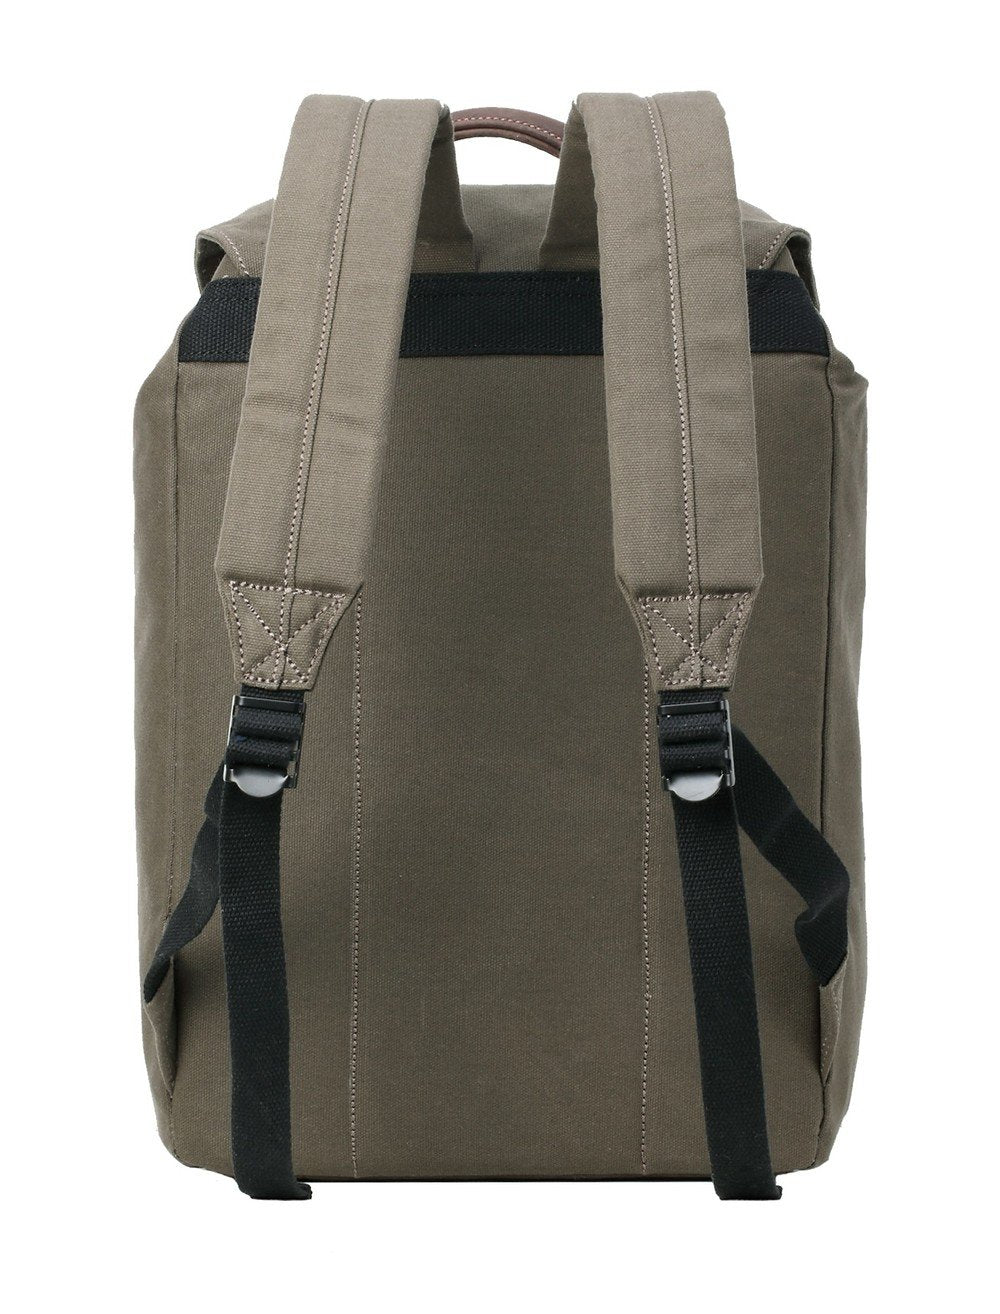 Bergen backpack which has many features including high quality hardware clip buckle, a branded fully-lined interior, wax coated treatment to create a water resistant barrier, multiple pockets to keep you organised, a leather wrapped top carry handle and a padded, adjustable back strap for extra comfort for everyday travelling. Back facing orientation.